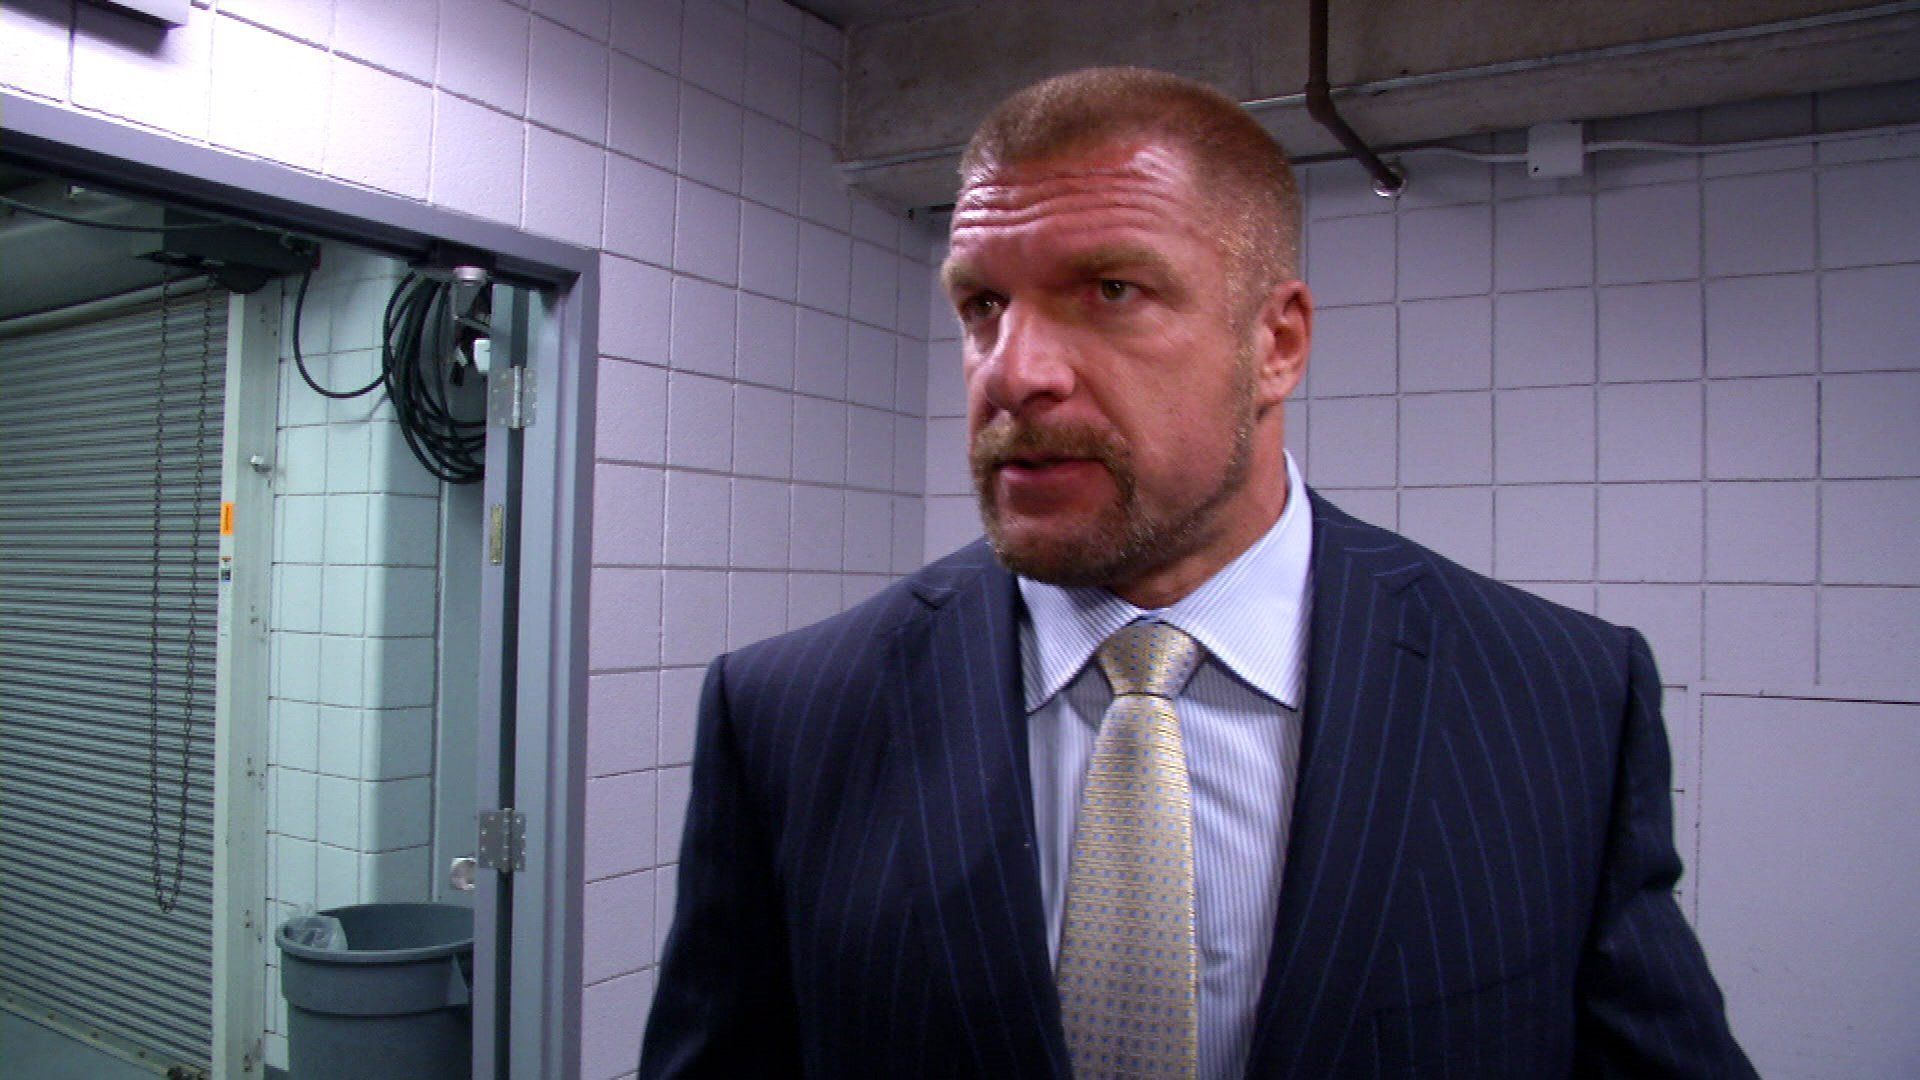 Triple H is retired from in-ring competition